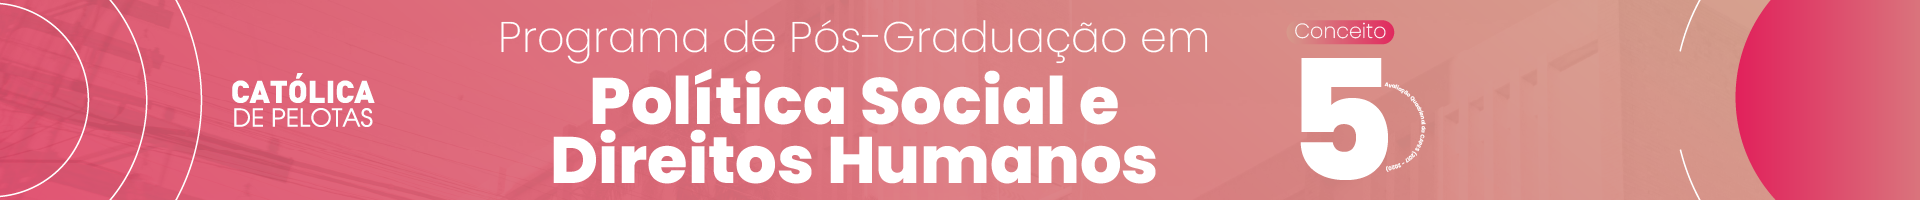 POST-GRADUATION IN SOCIAL POLICY AND HUMAN RIGHTS PROGRAM